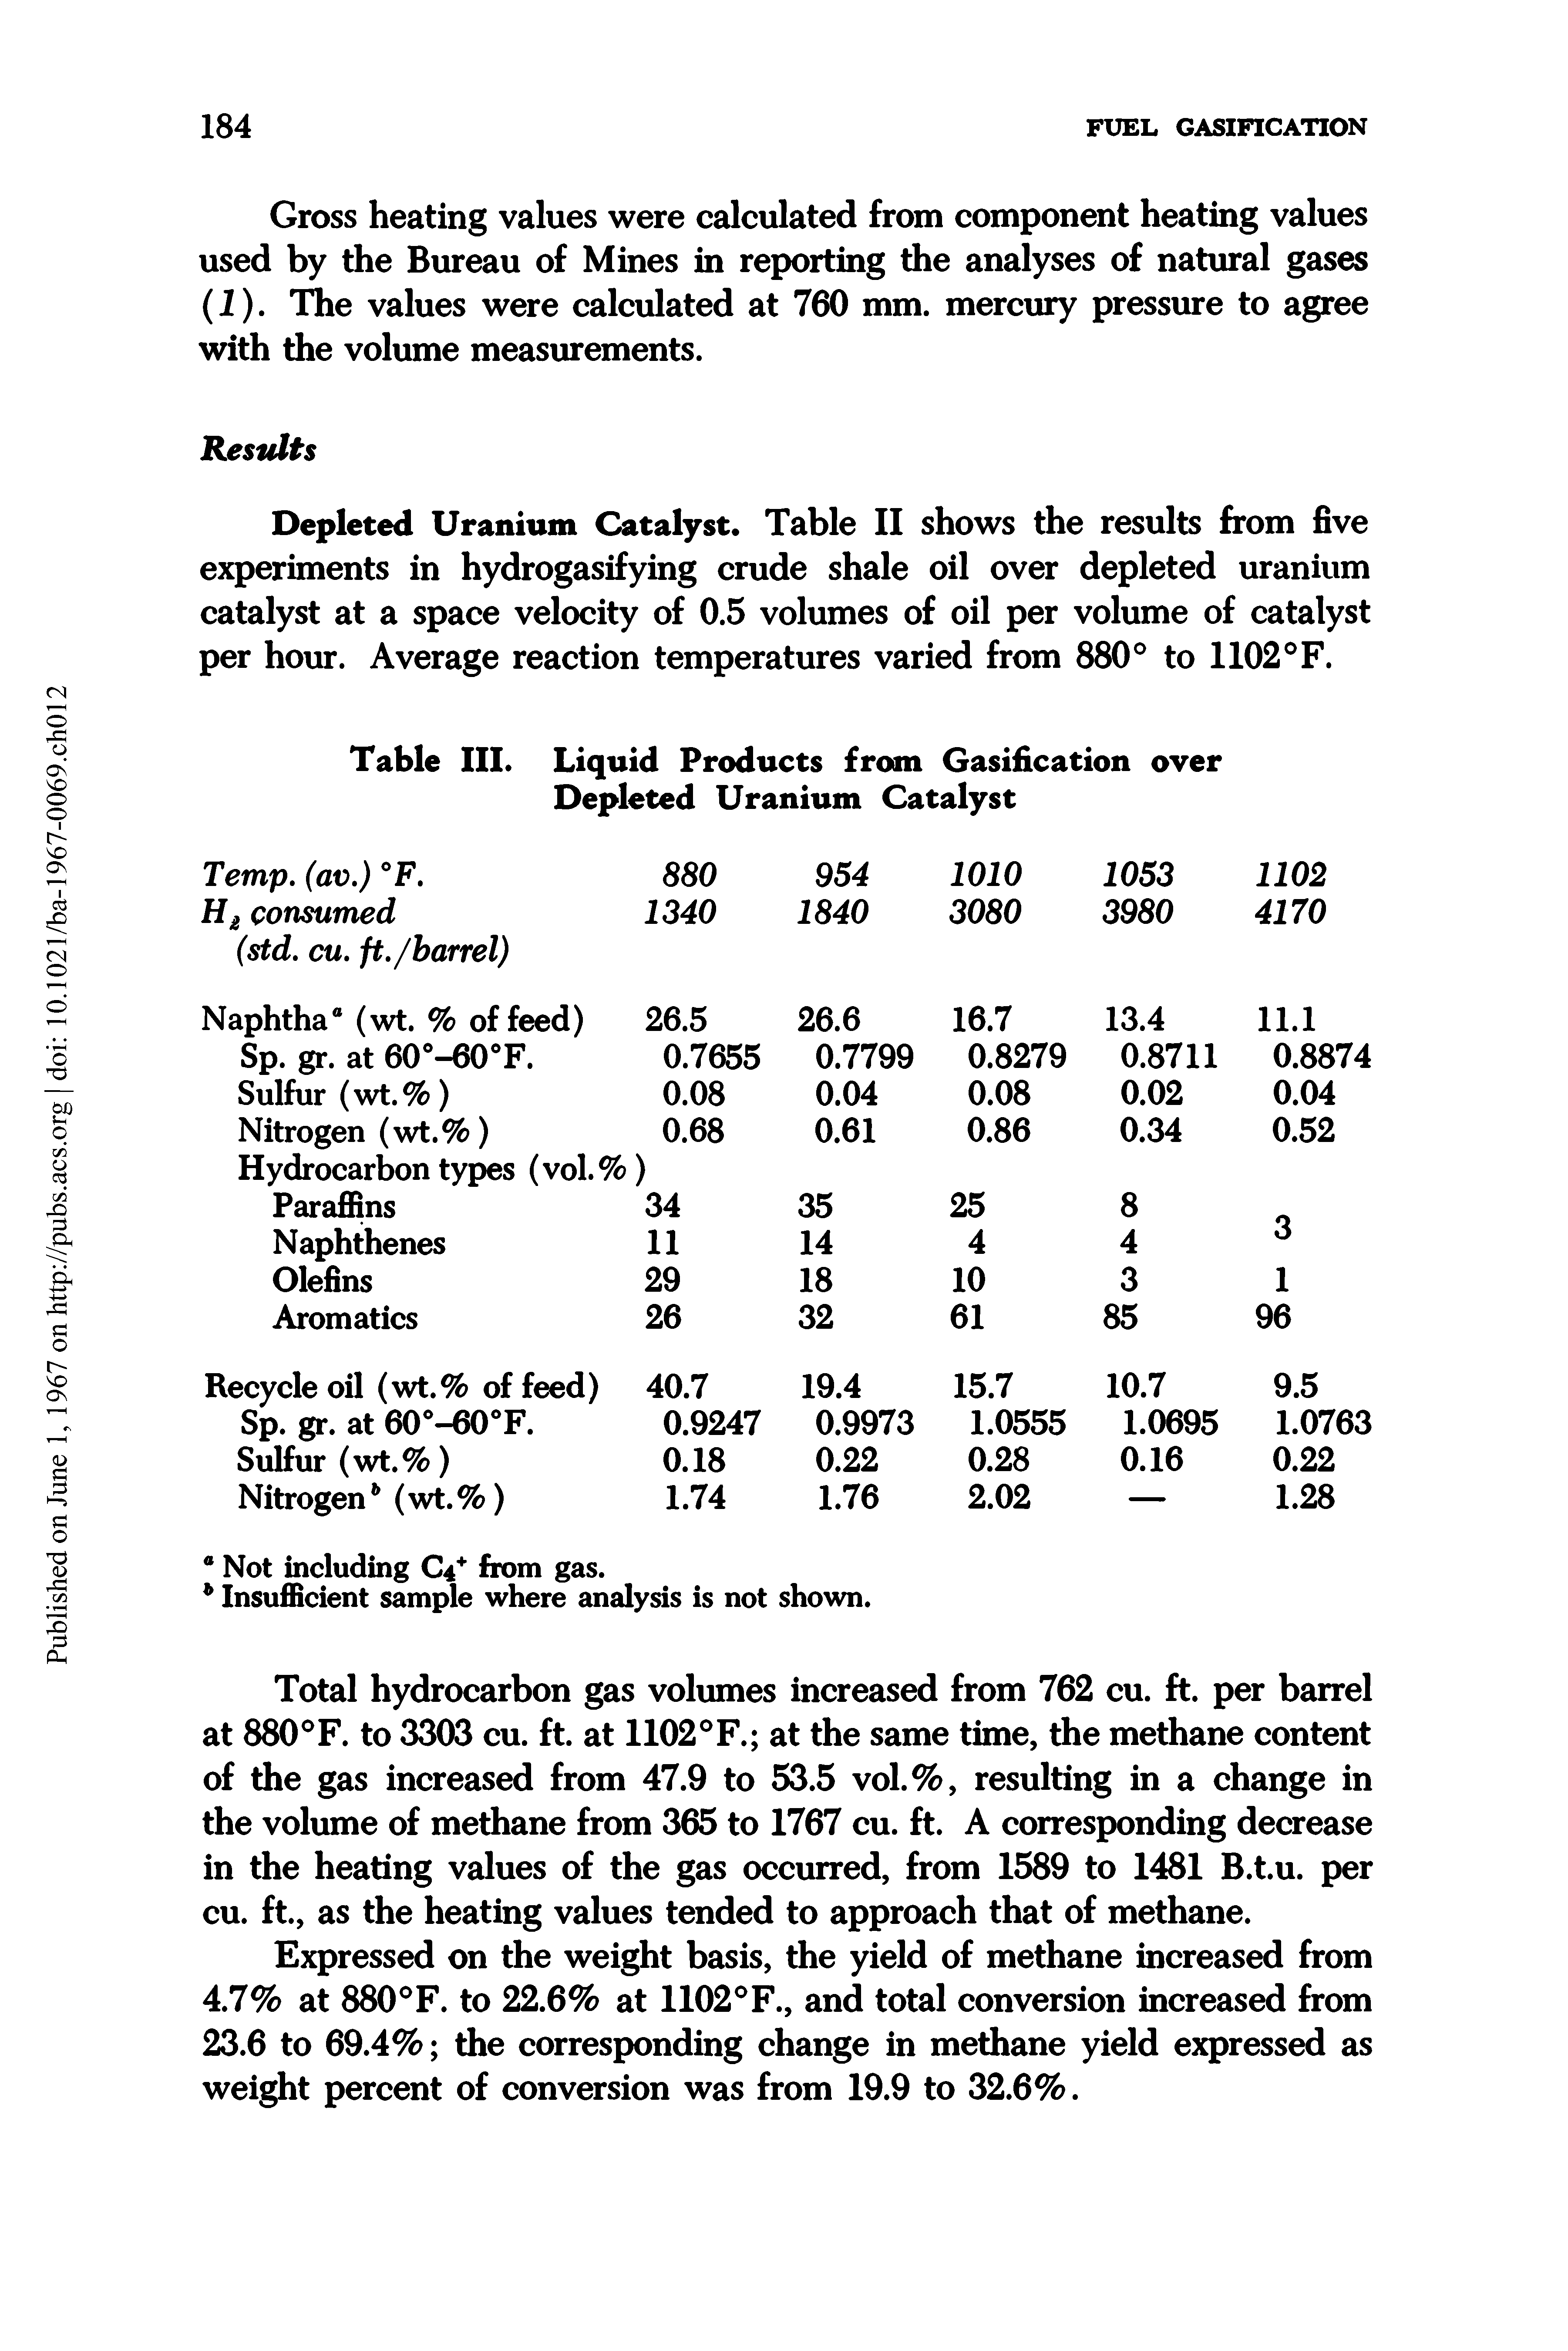 Table III. Liquid Products from Gasification over Depleted Uranium Catalyst...